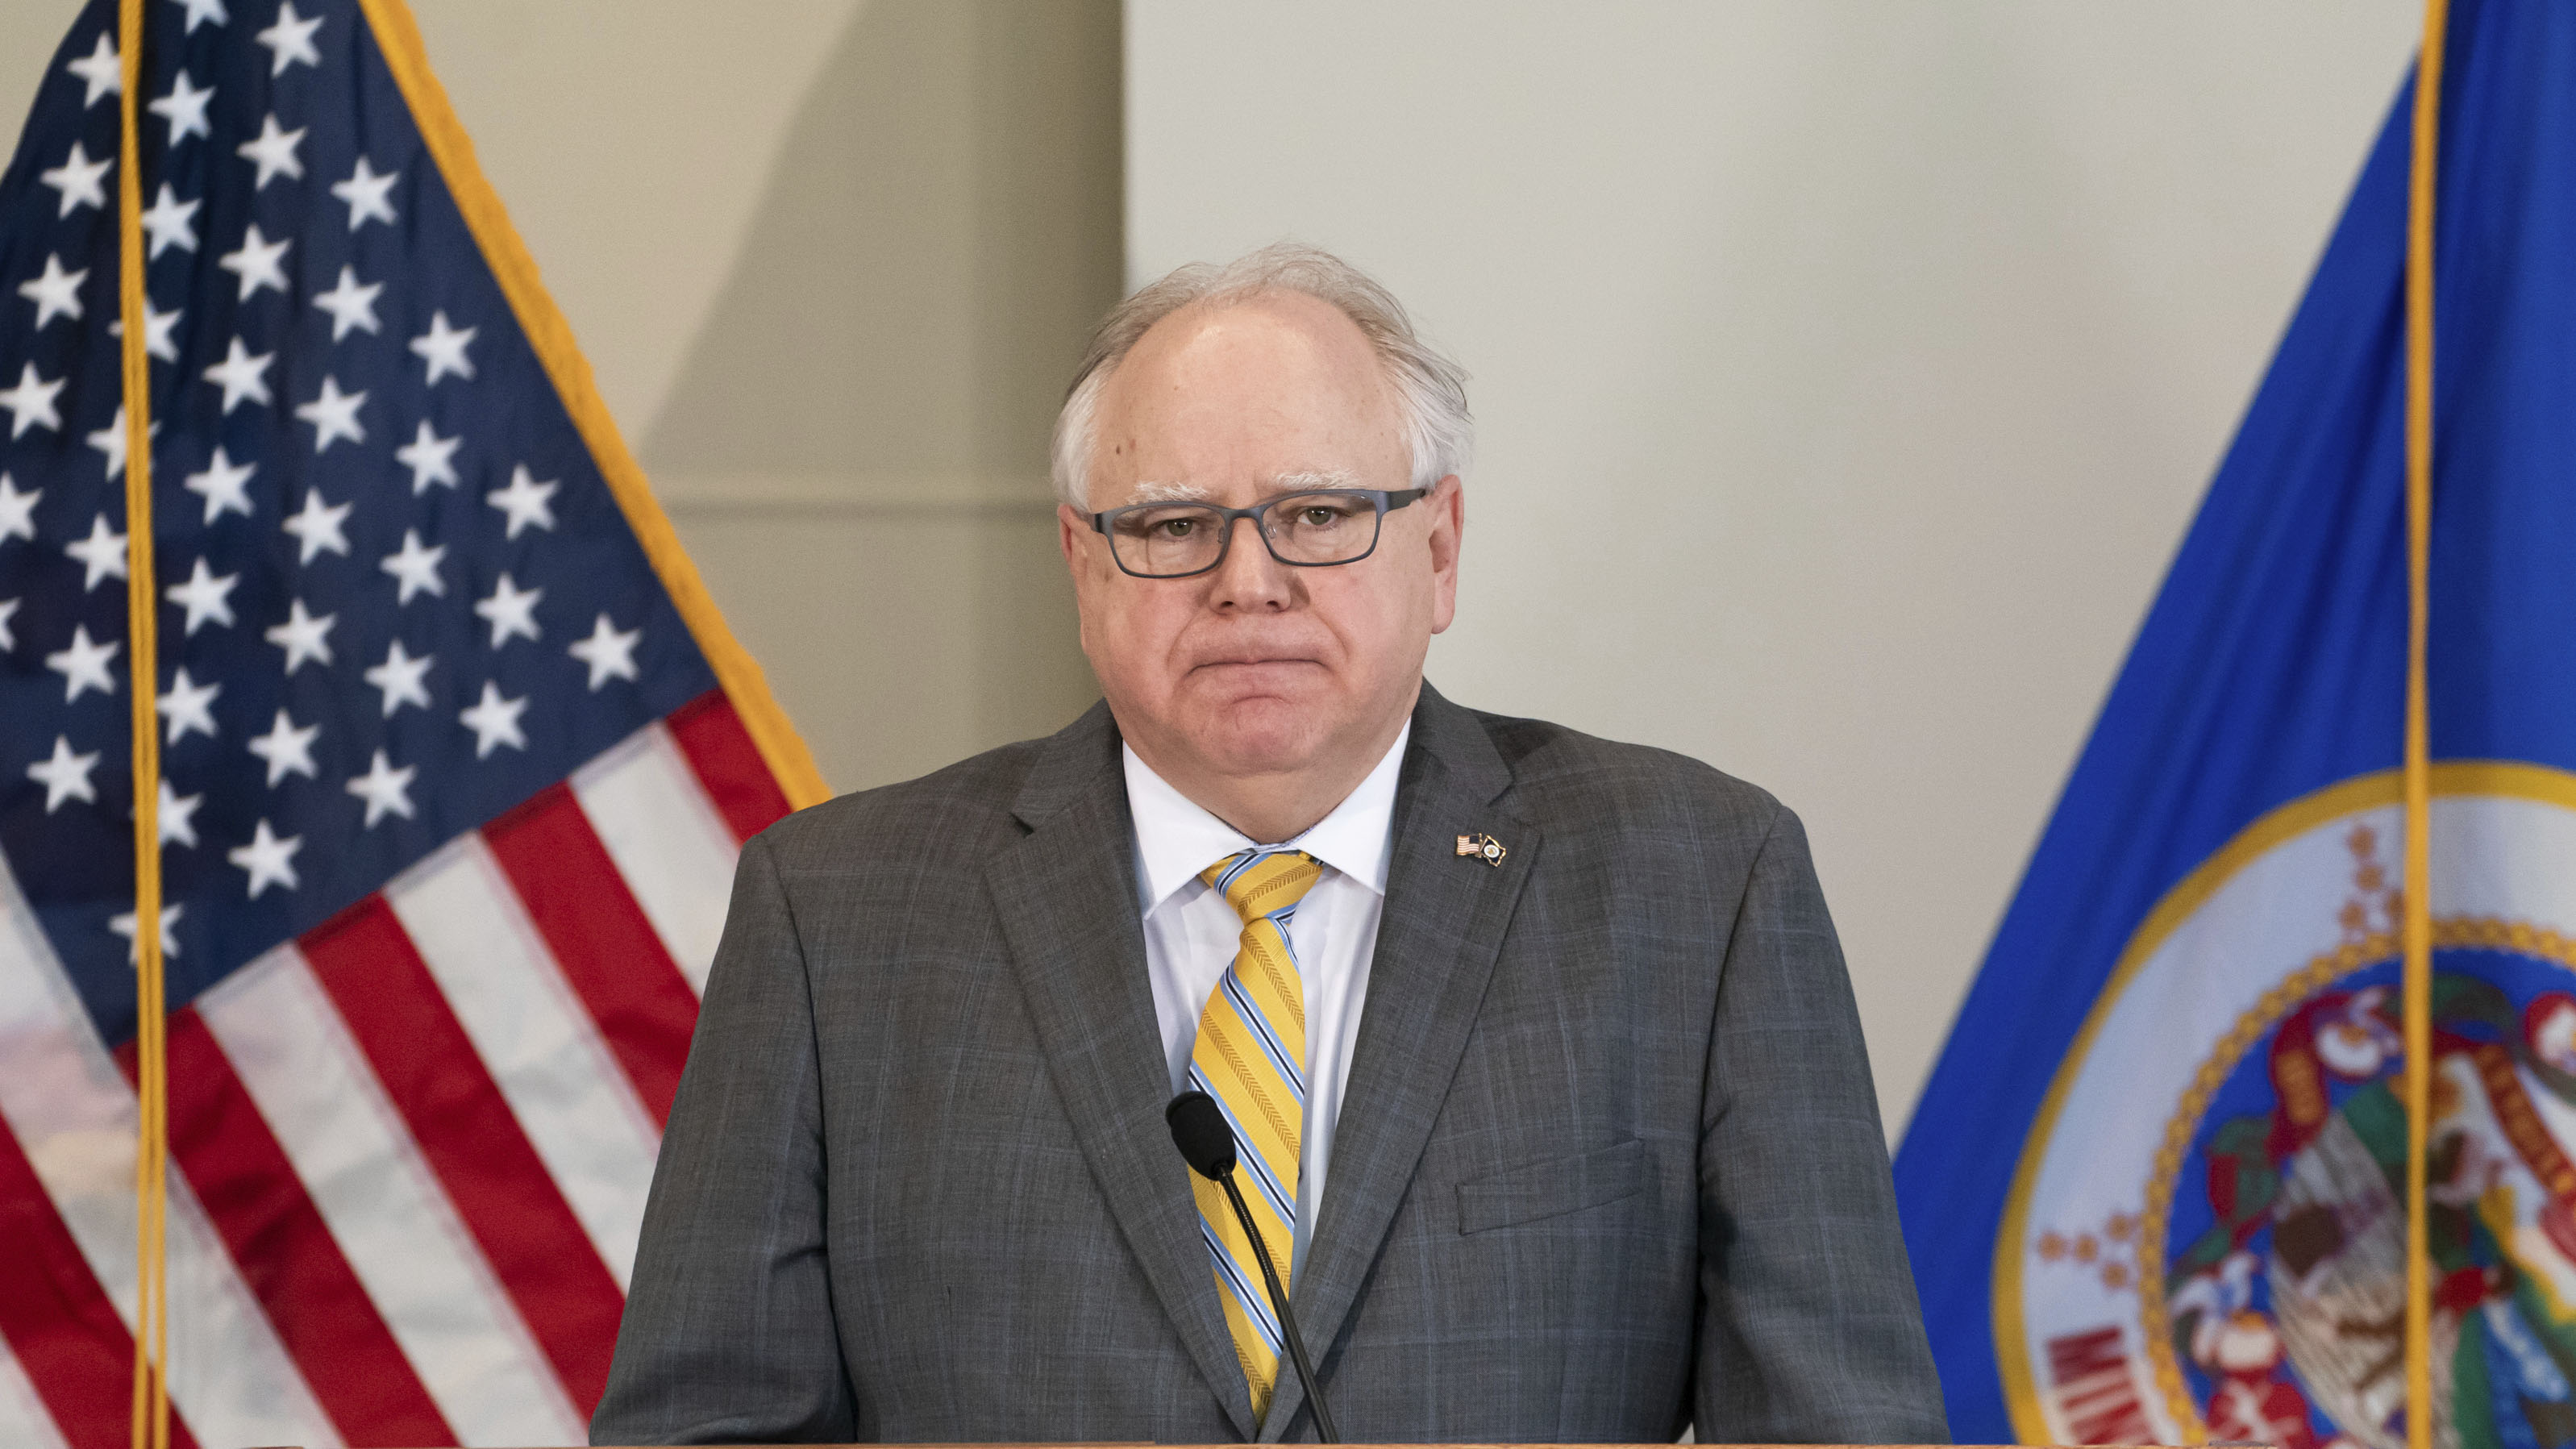 Minnesota Gov. Tim Walz speaks during a news conference in St. Paul, Minnesota, on May 29.